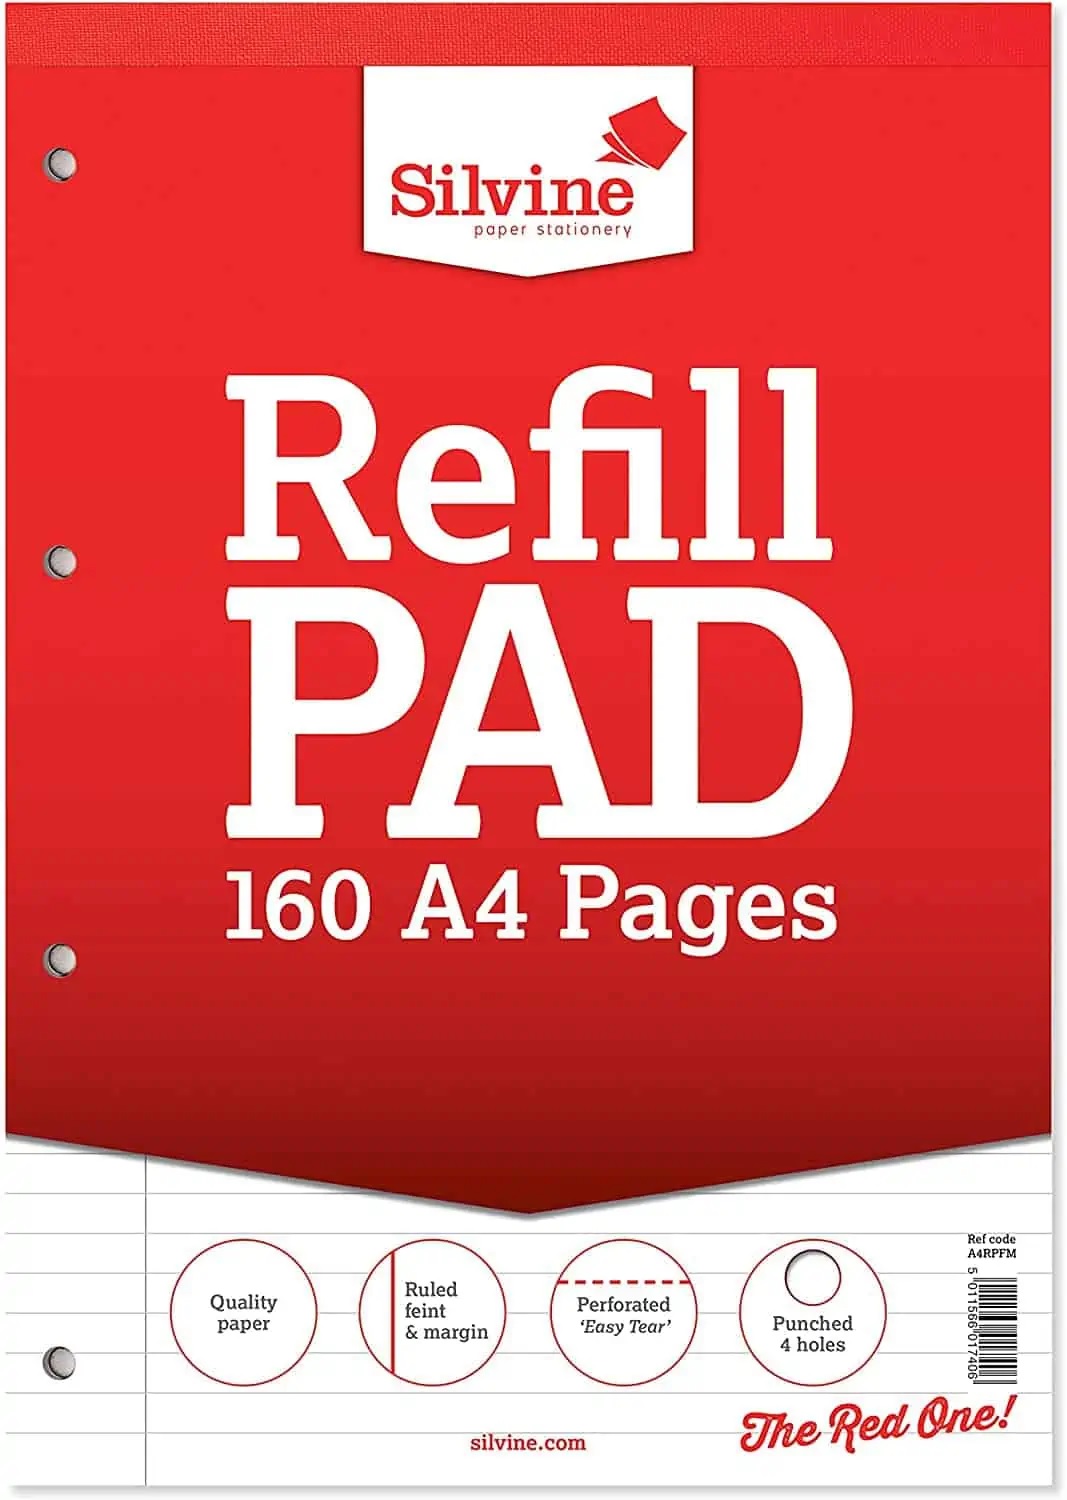 Silvine A4 Refill Pad, 160 pages, Feint & Margin (Red cover)